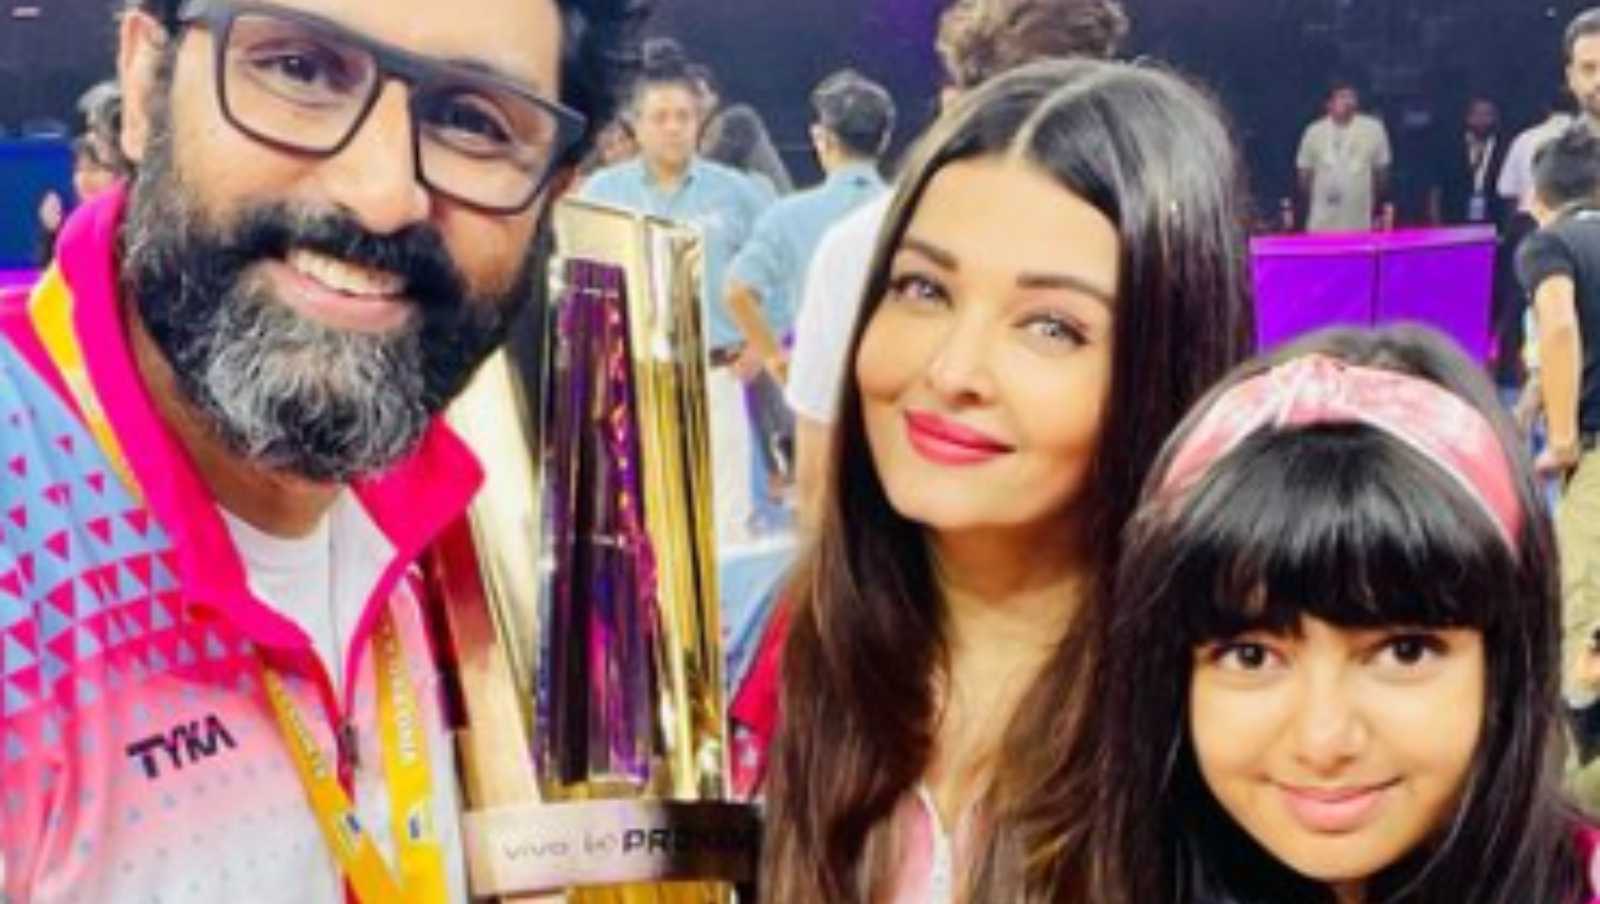 Abhishek, Aishwarya and Aaradhya Bachchan pose with the Pro Kabaddi League trophy after their team wins, share heartfelt posts